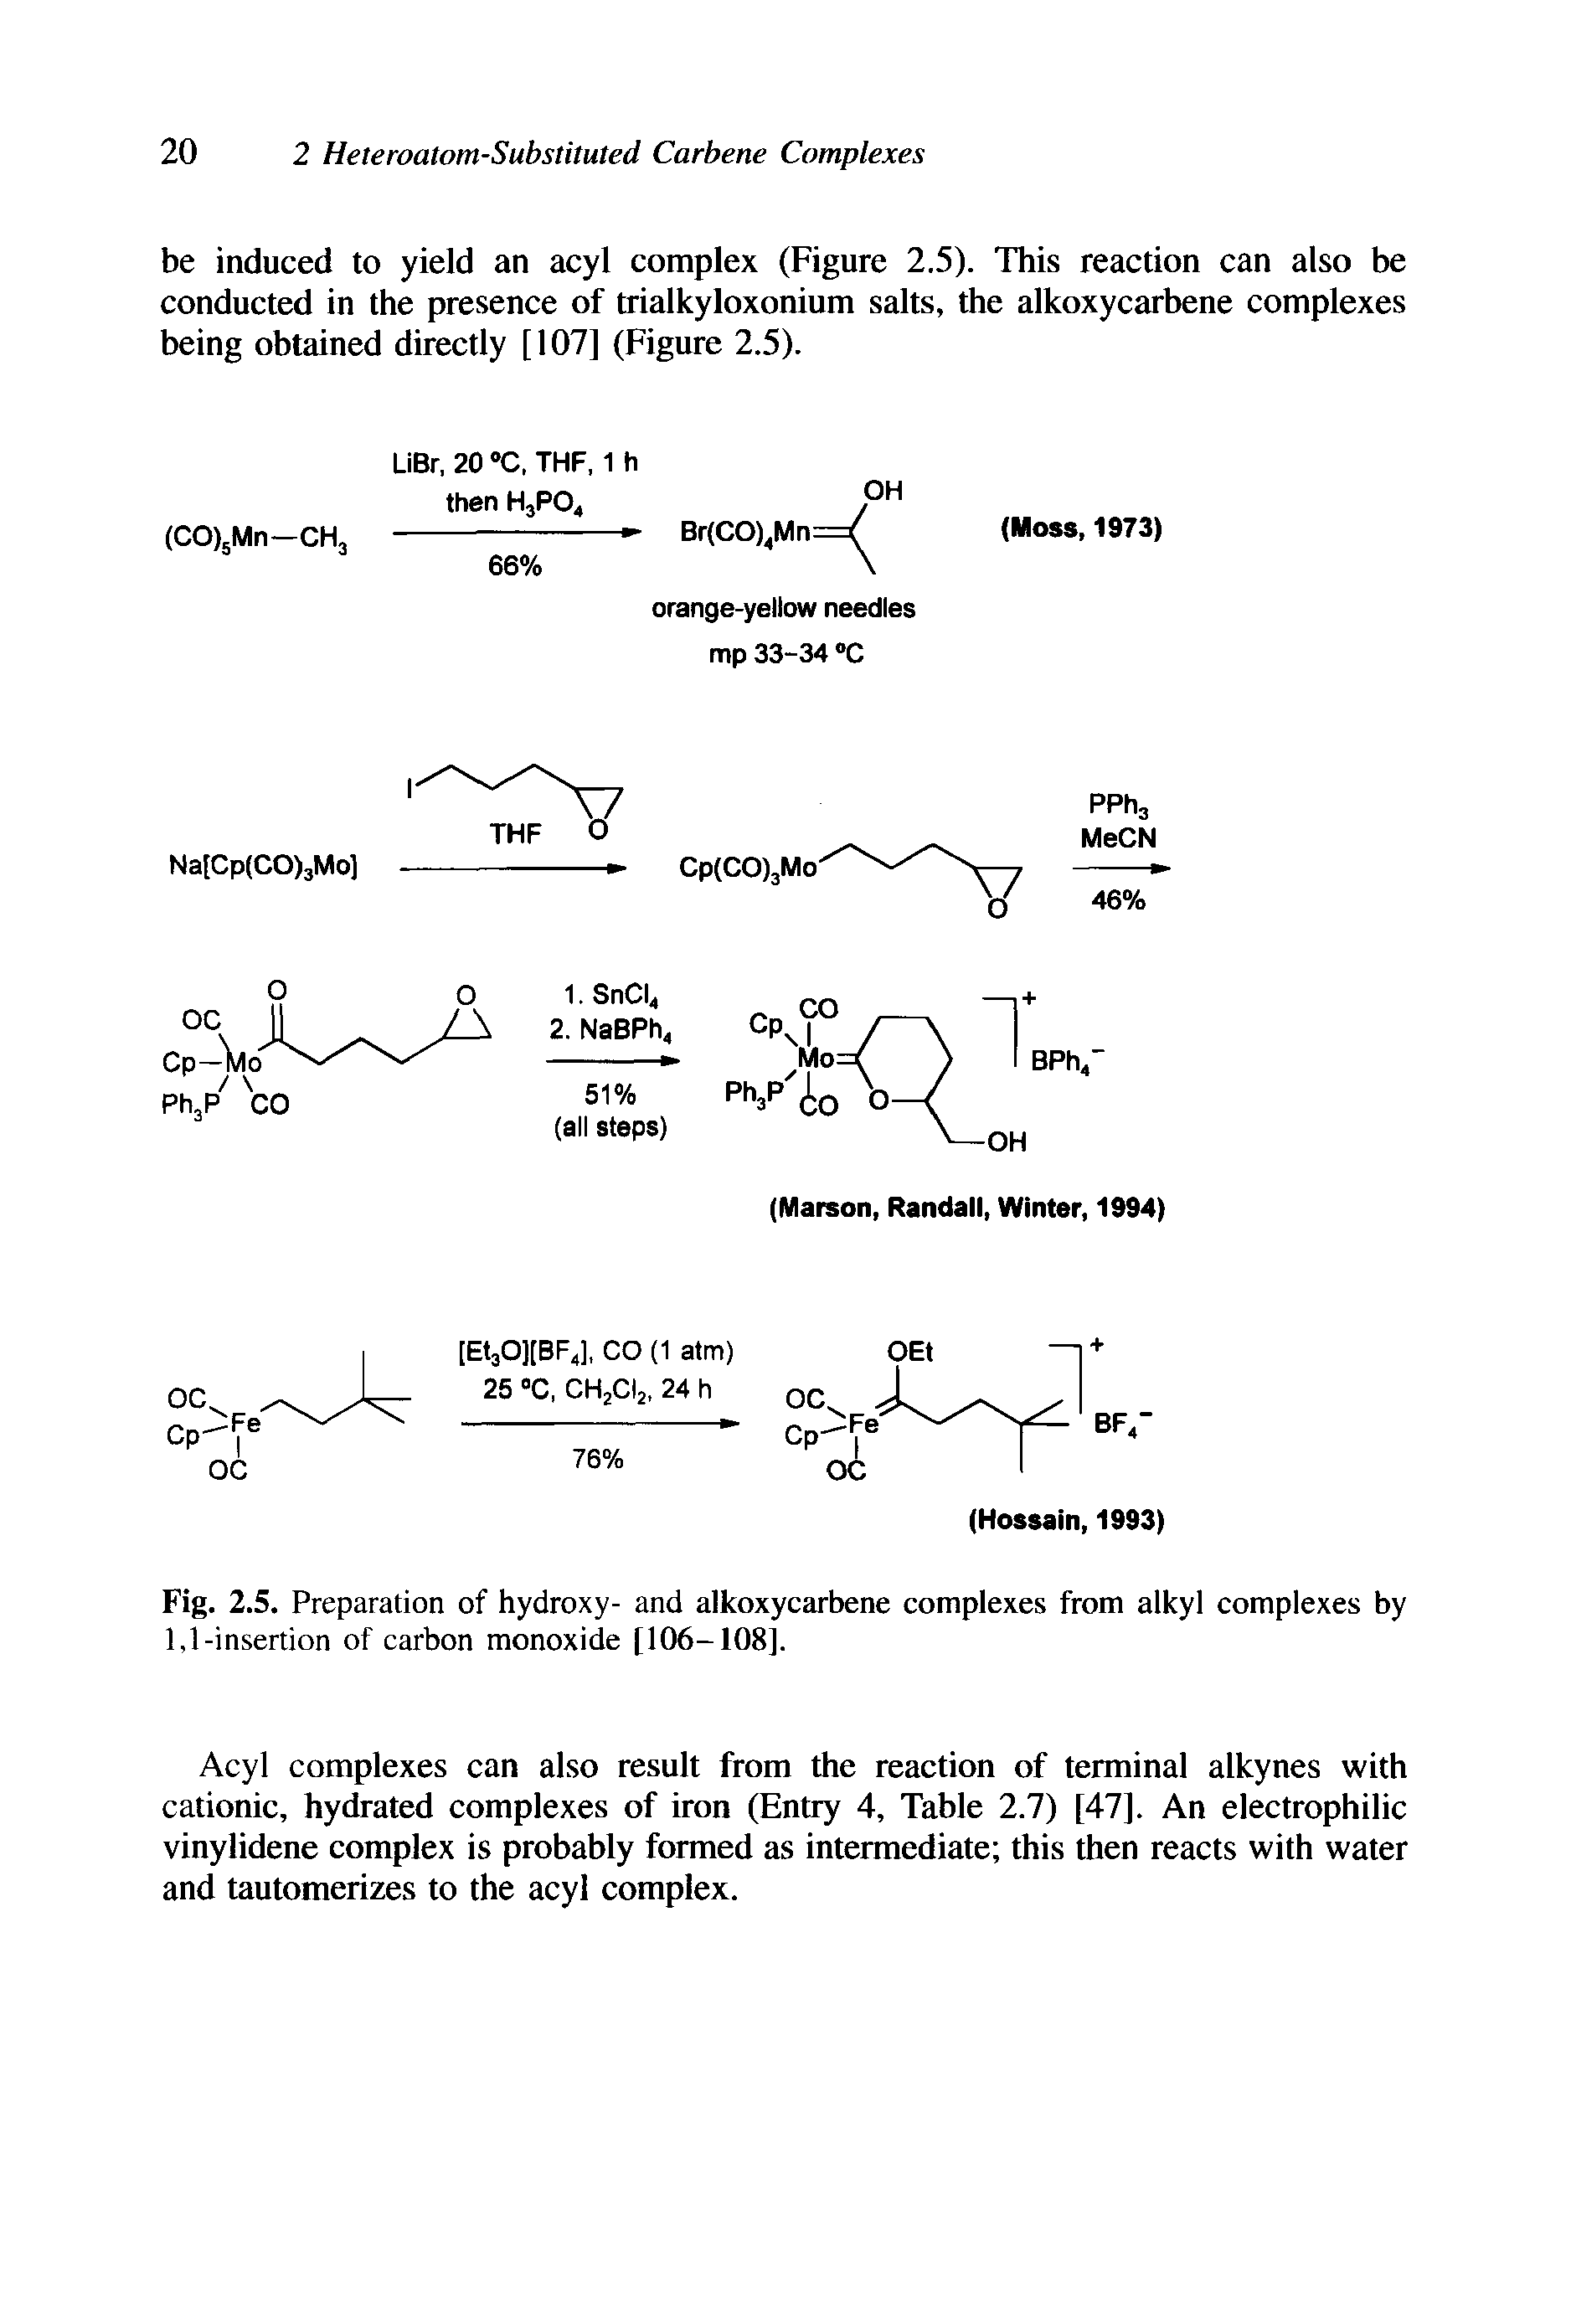 Fig. 2.5. Preparation of hydroxy- and alkoxycarbene complexes from alkyl complexes by 1,1-insertion of carbon monoxide [106-108].